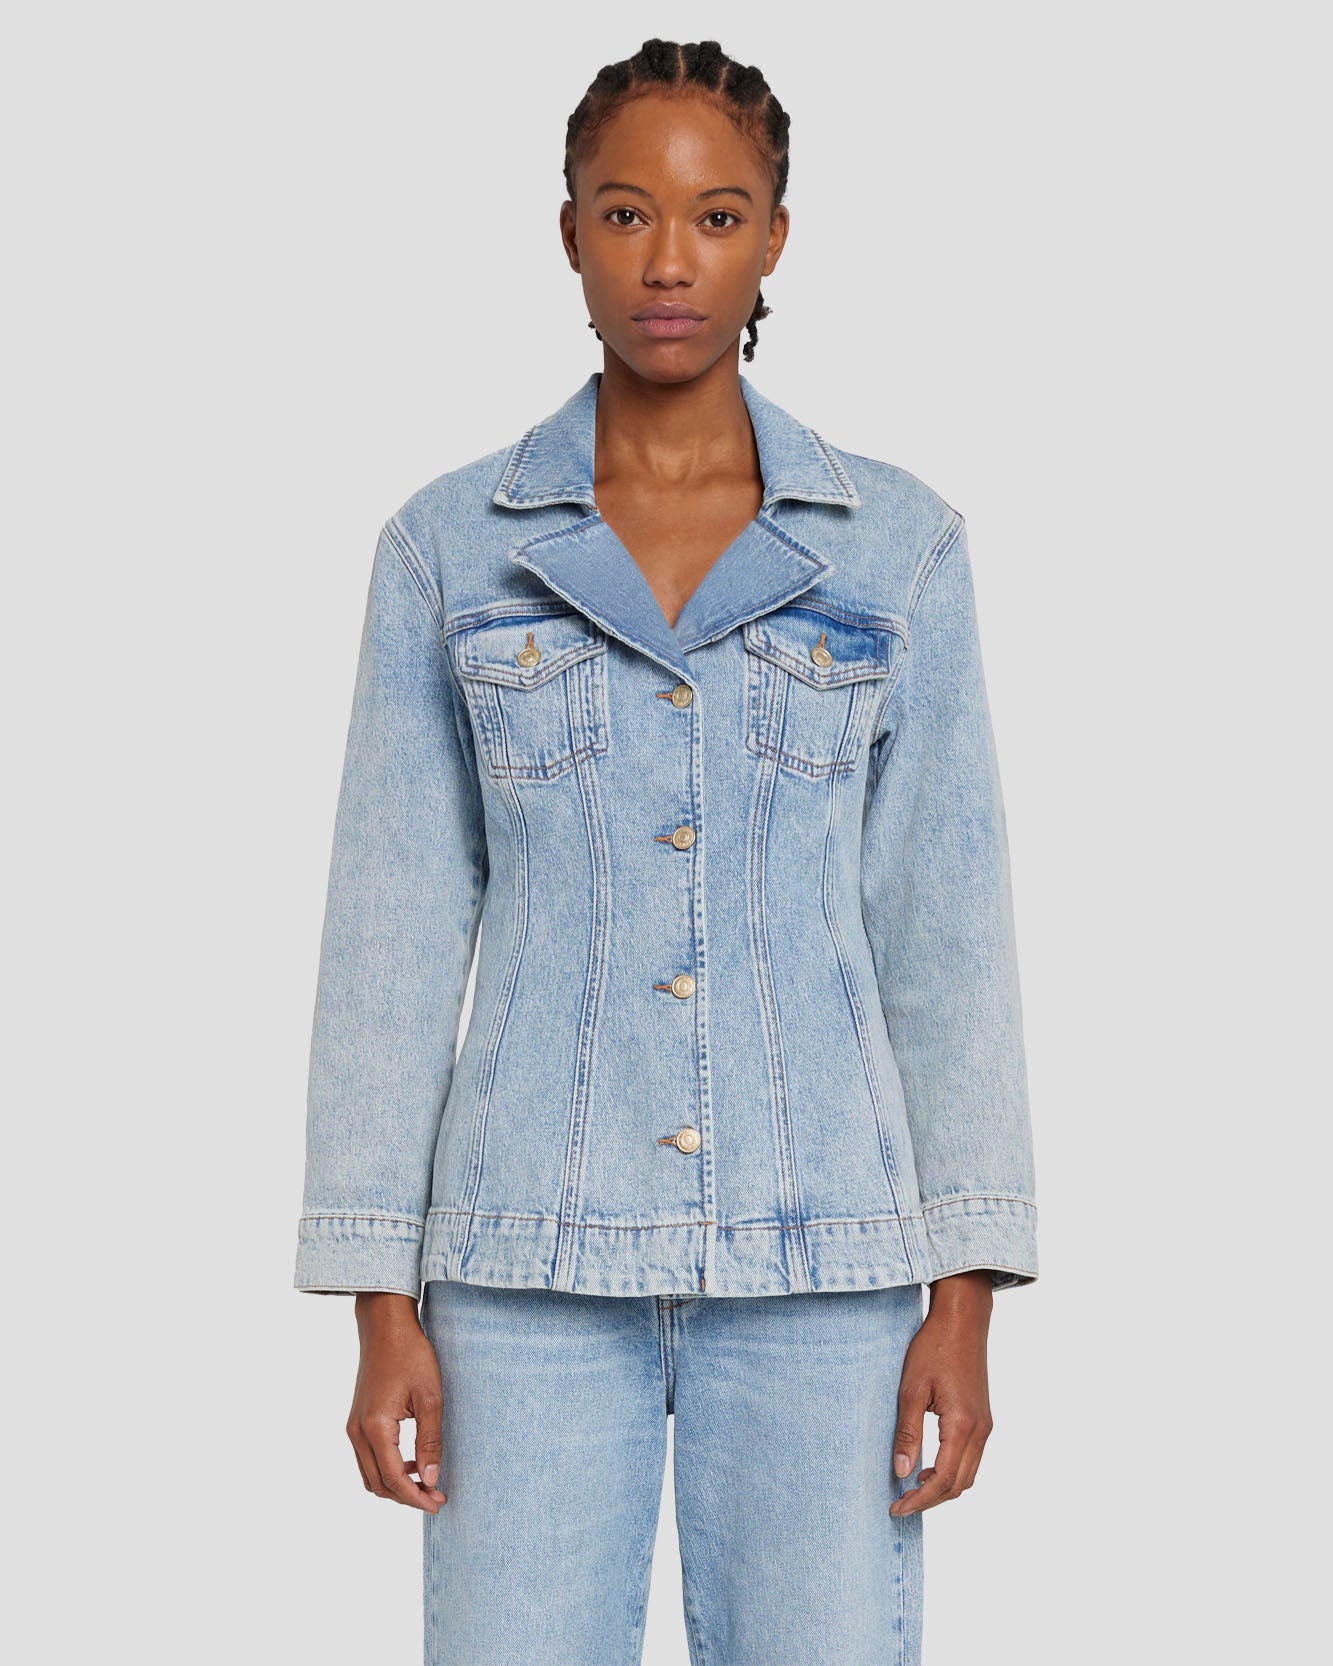 MANKIND Tailored Trucker Jacket in Ode To | 7 For All Mankind